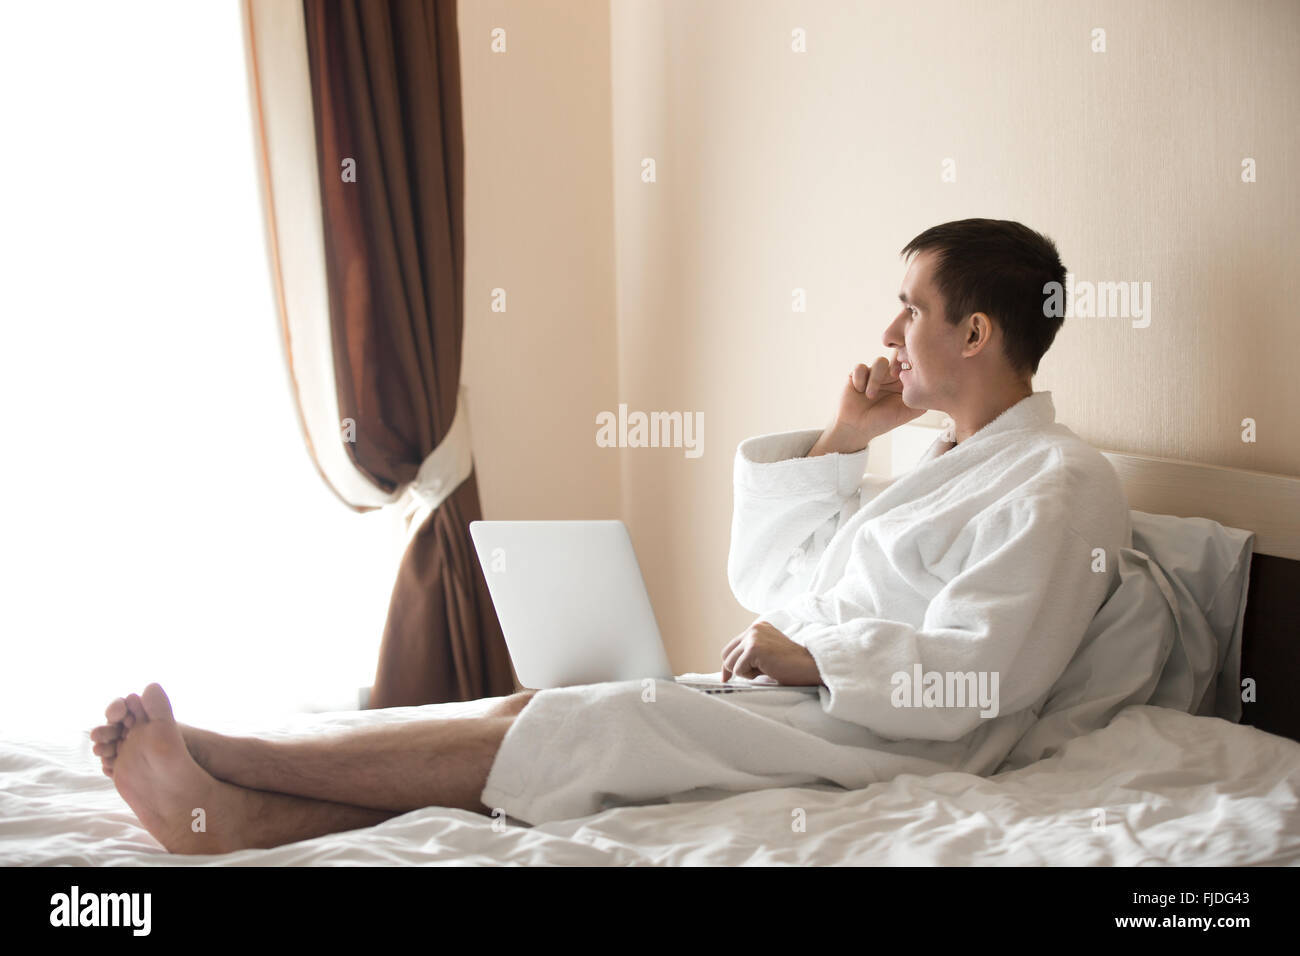 Portrait of attractive smiling young barefoot man wearing white bath robe sitting on bed with laptop, male model talking on cell Stock Photo